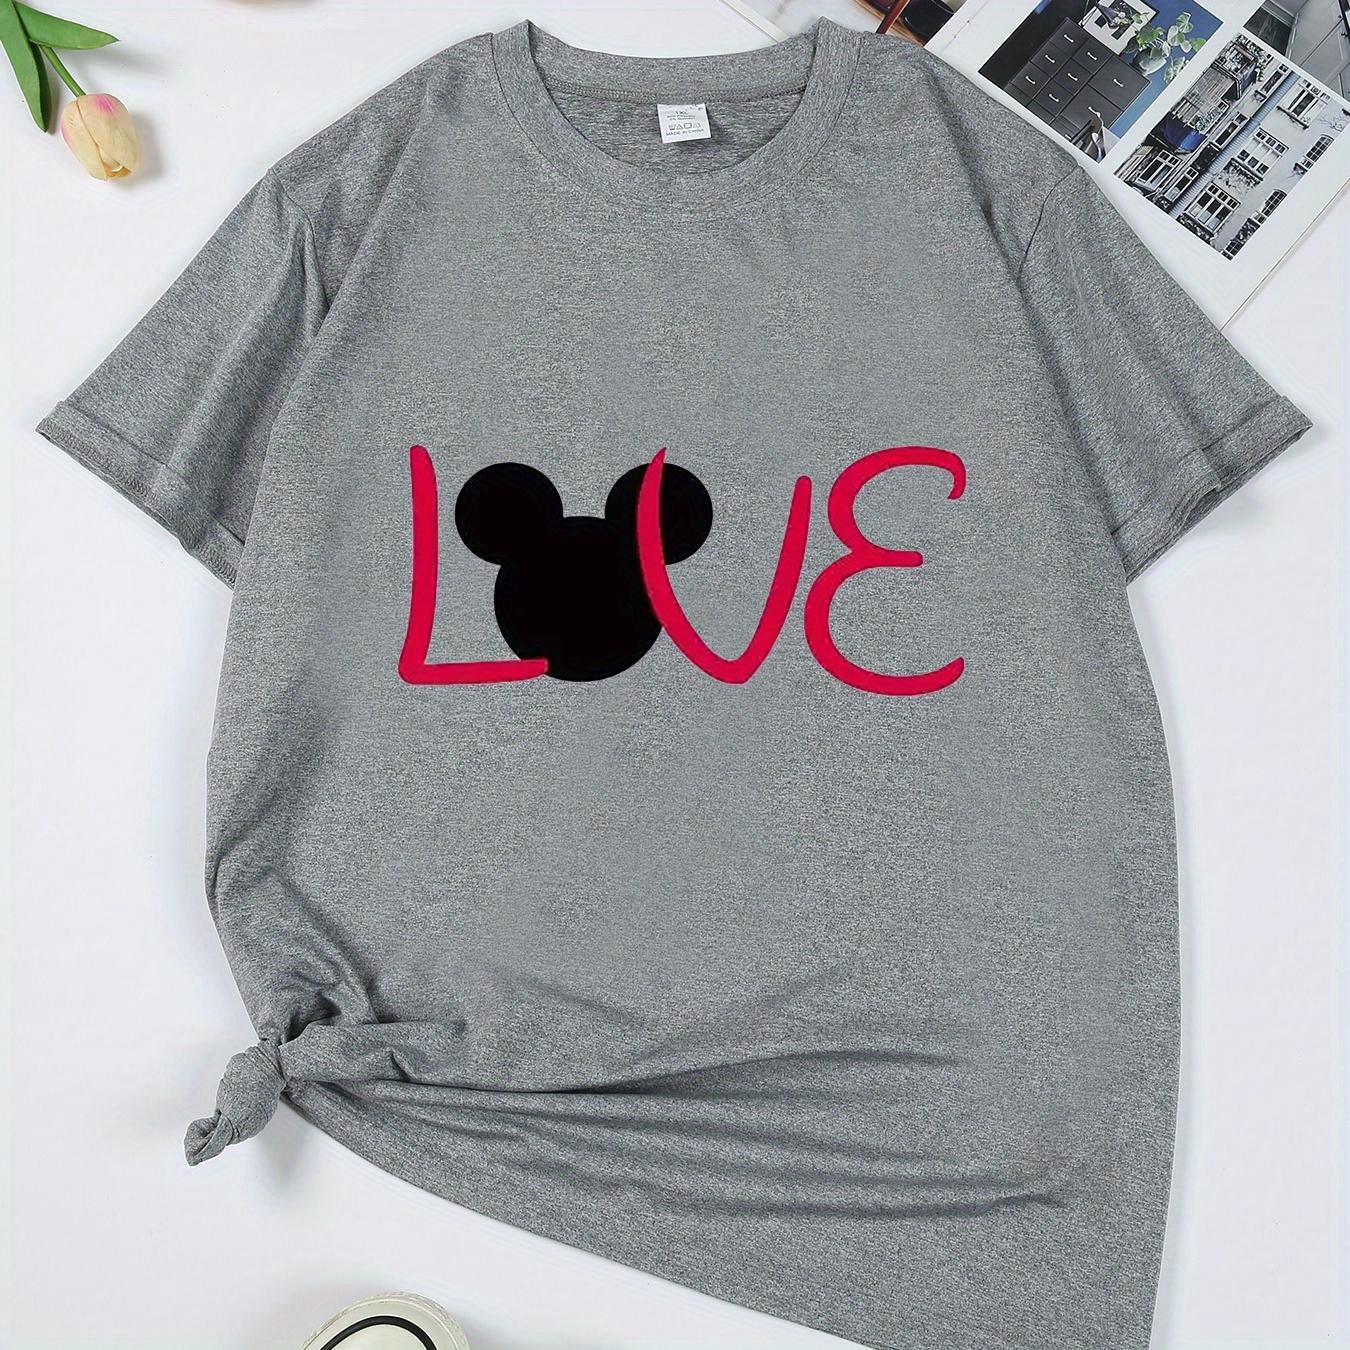 

Women's Plus Size Casual Sporty T-shirt, Love Cartoon Print, Comfort Fit Short Sleeve Tee, Fashion Breathable Casual Top